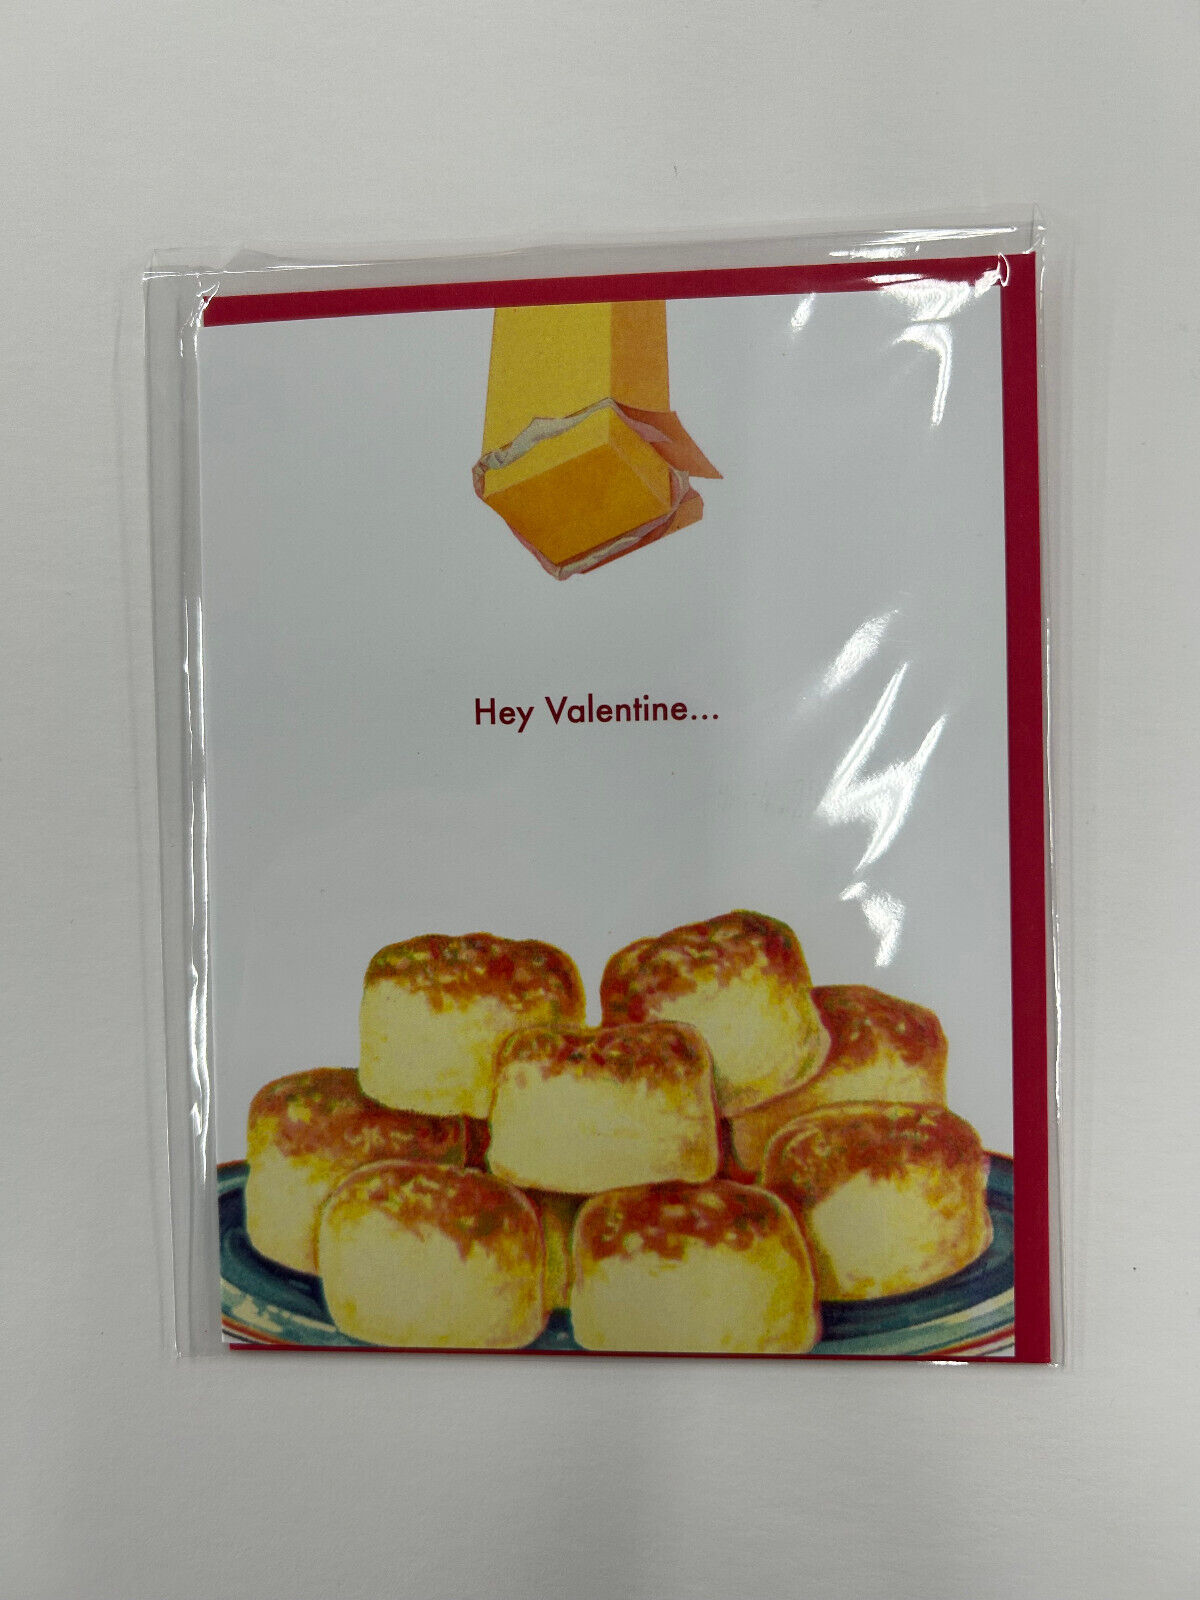 Funny Valentine's Card - Hey Valentine these buns aren't going to butter themsel